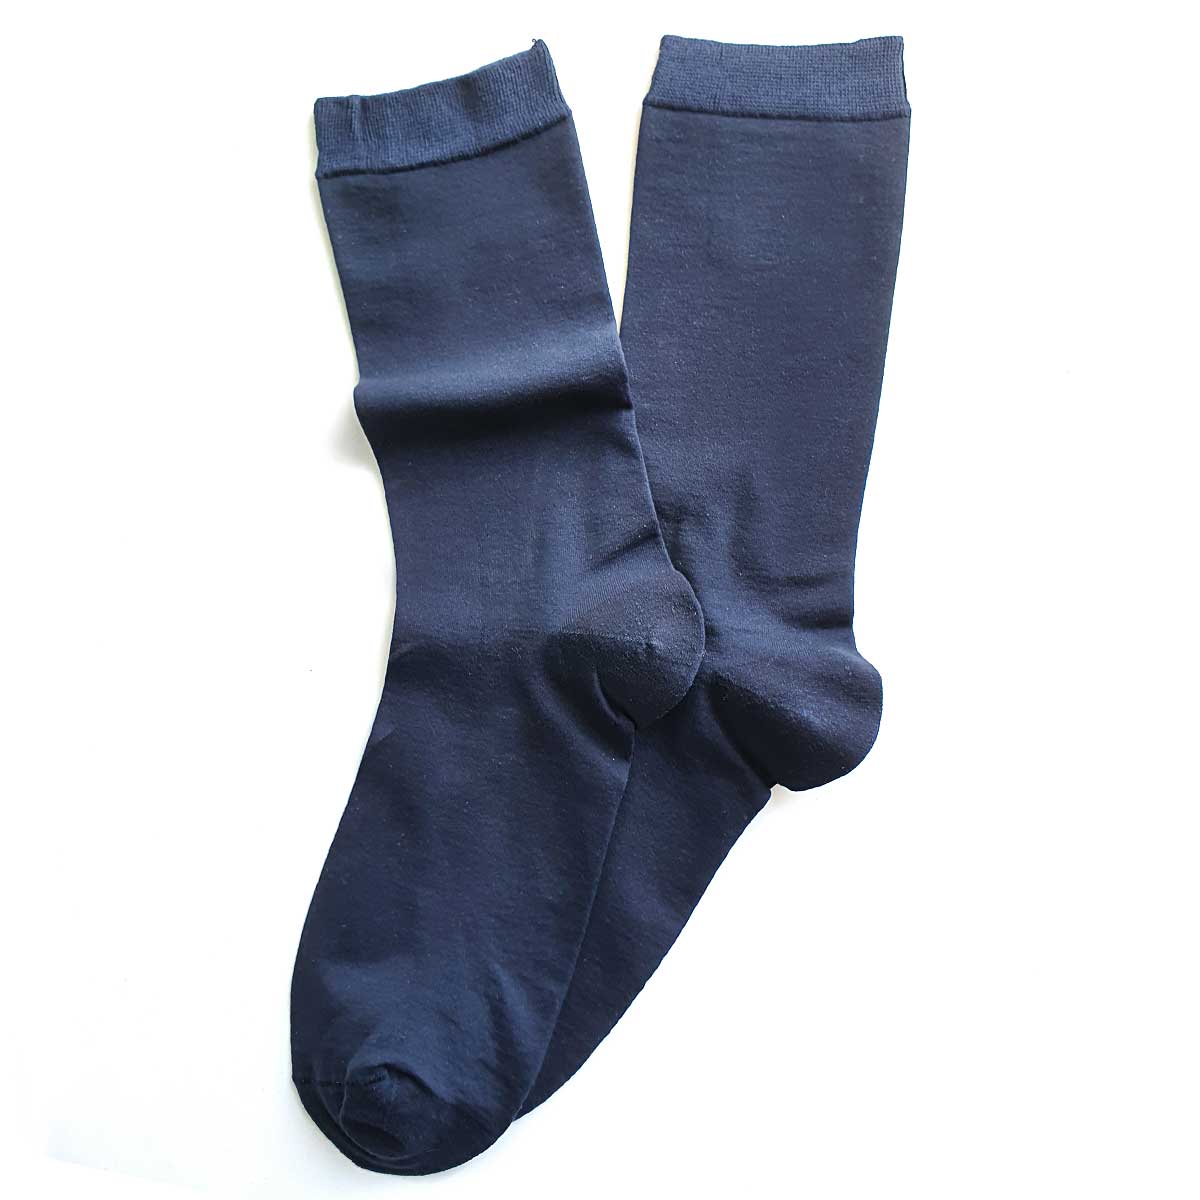 Extra thin and fine women's socks in 82% cotton